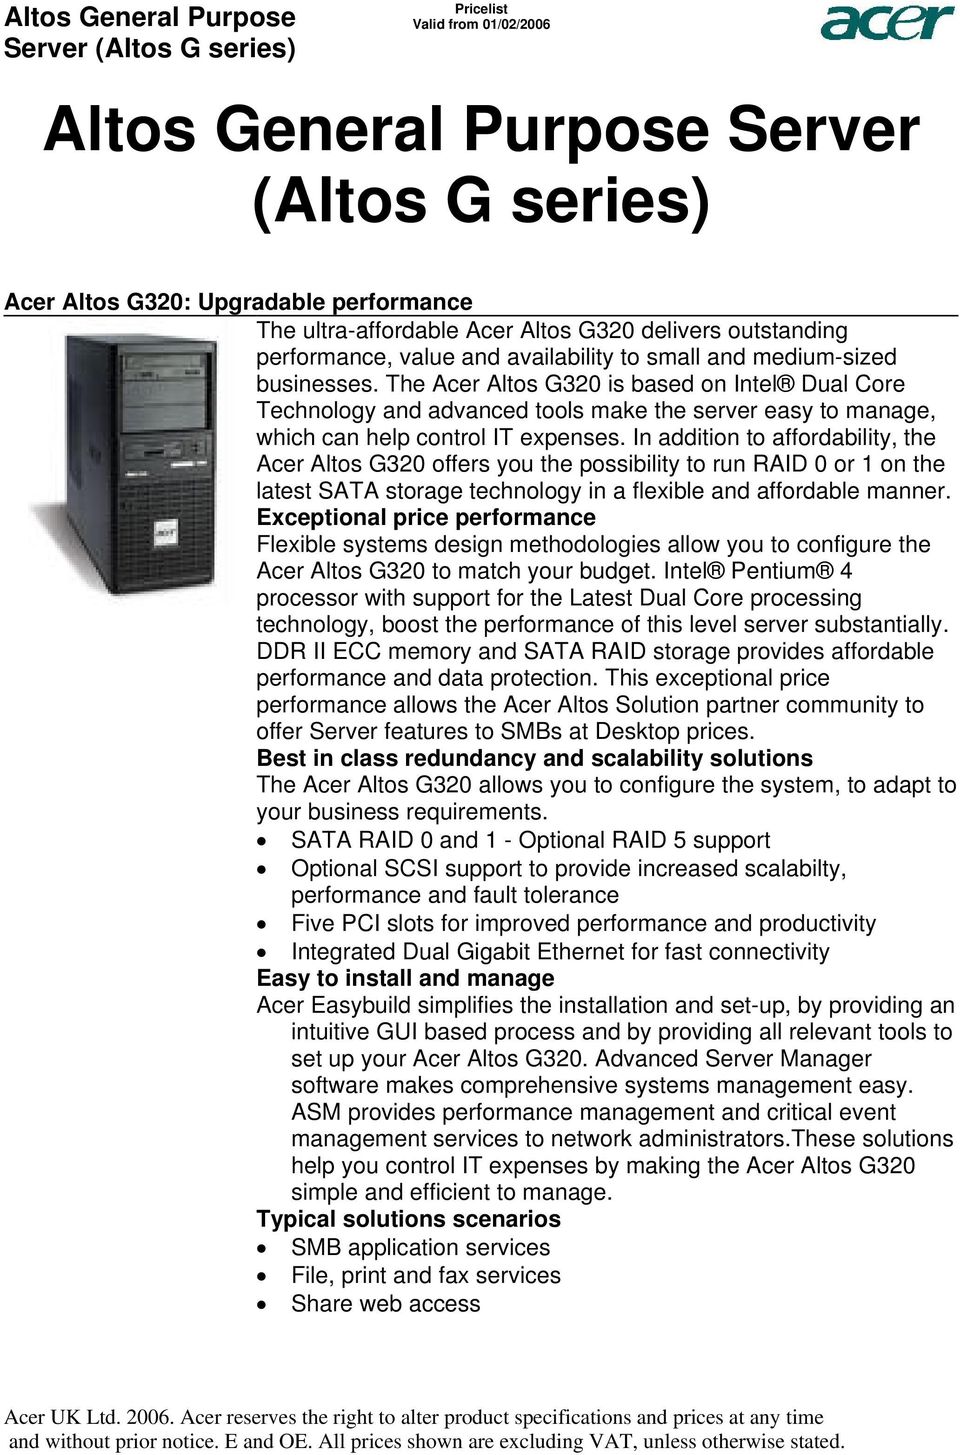 control IT expenses In addition to affordability, the Acer Altos G320 offers you the possibility to run RAID 0 or 1 on the latest SATA storage technology in a flexible and affordable manner